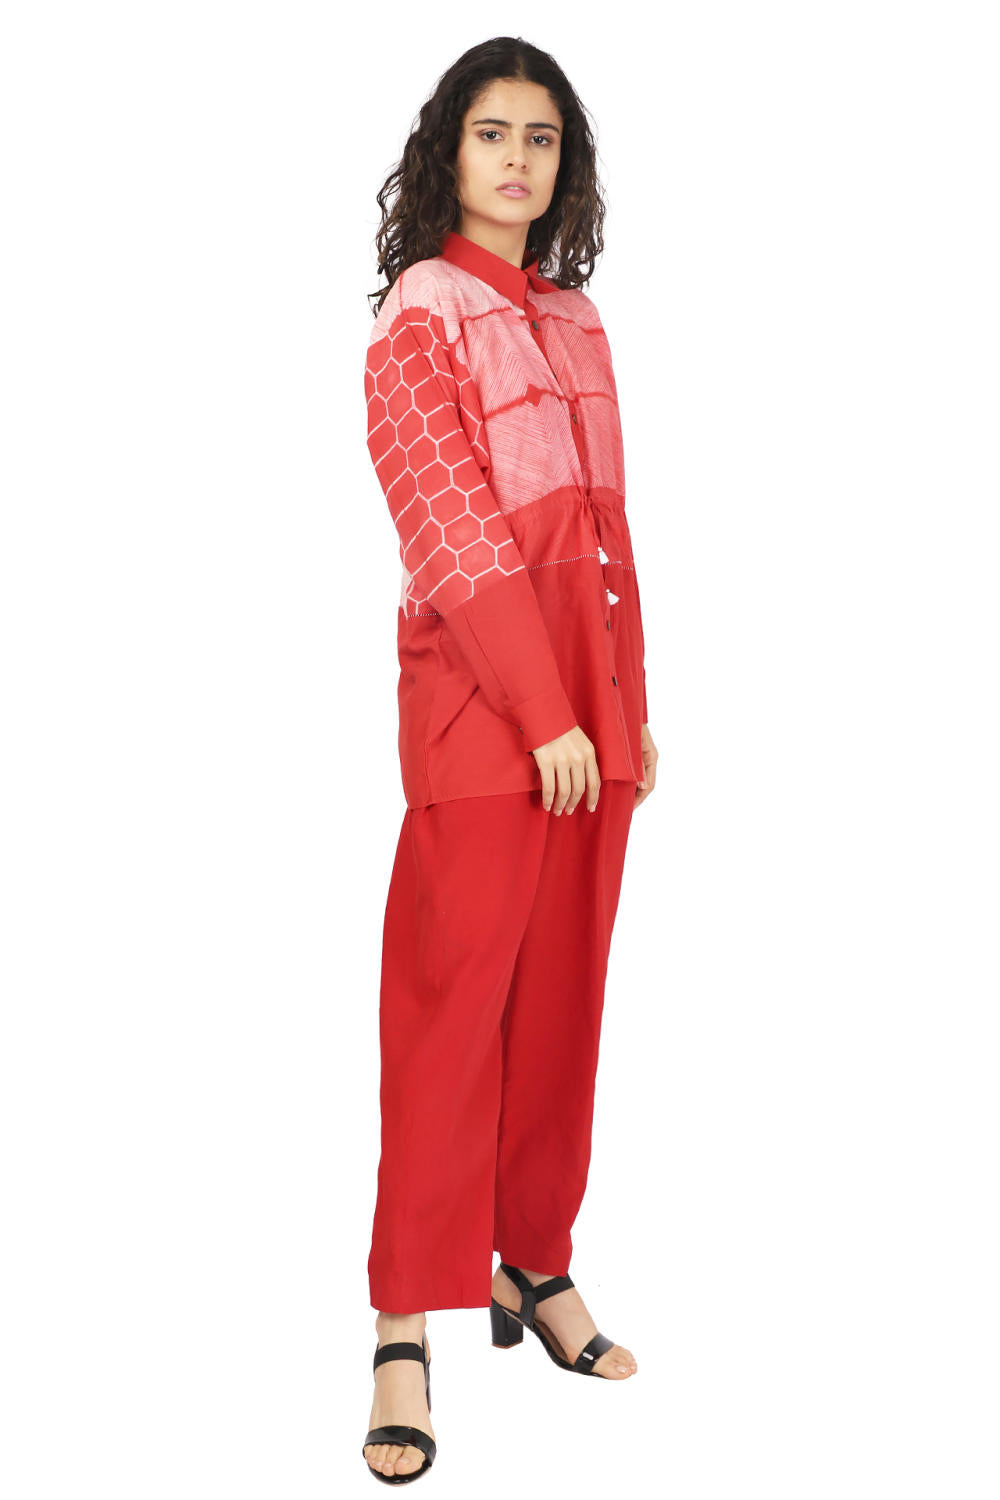 Red Stitched Shibori And Pants Co-ord Fashion The Pot Plant